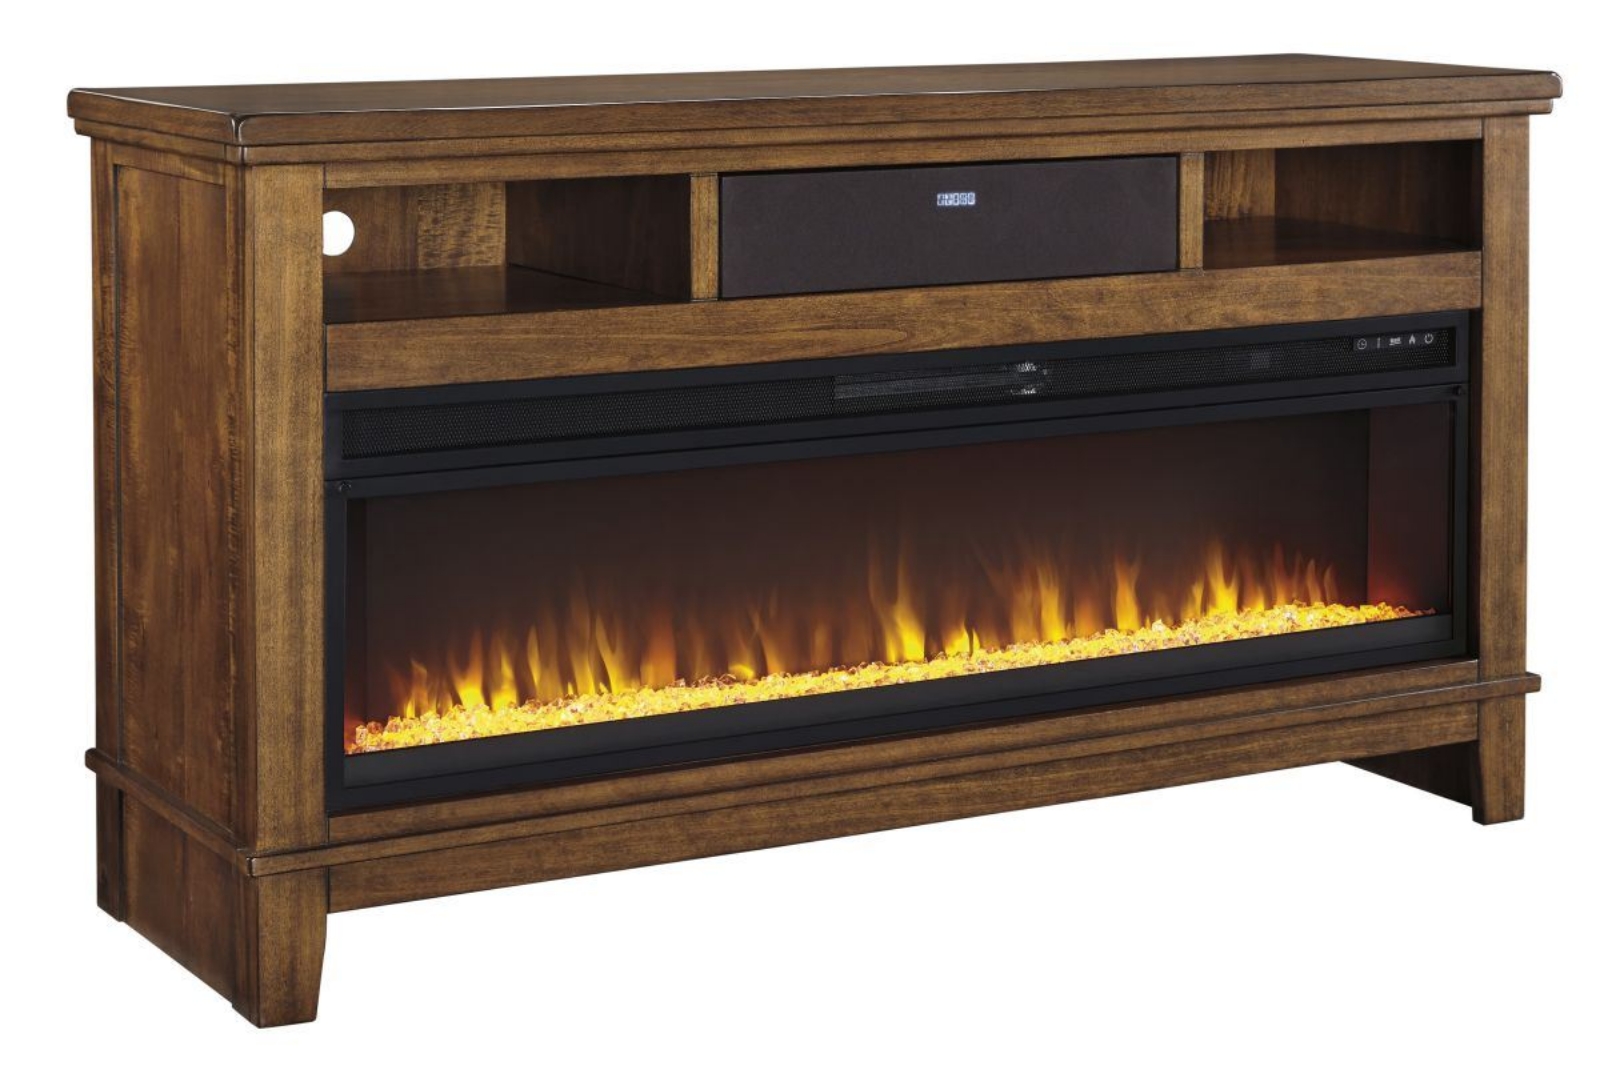 Picture of Ralene TV Stand with Fireplace